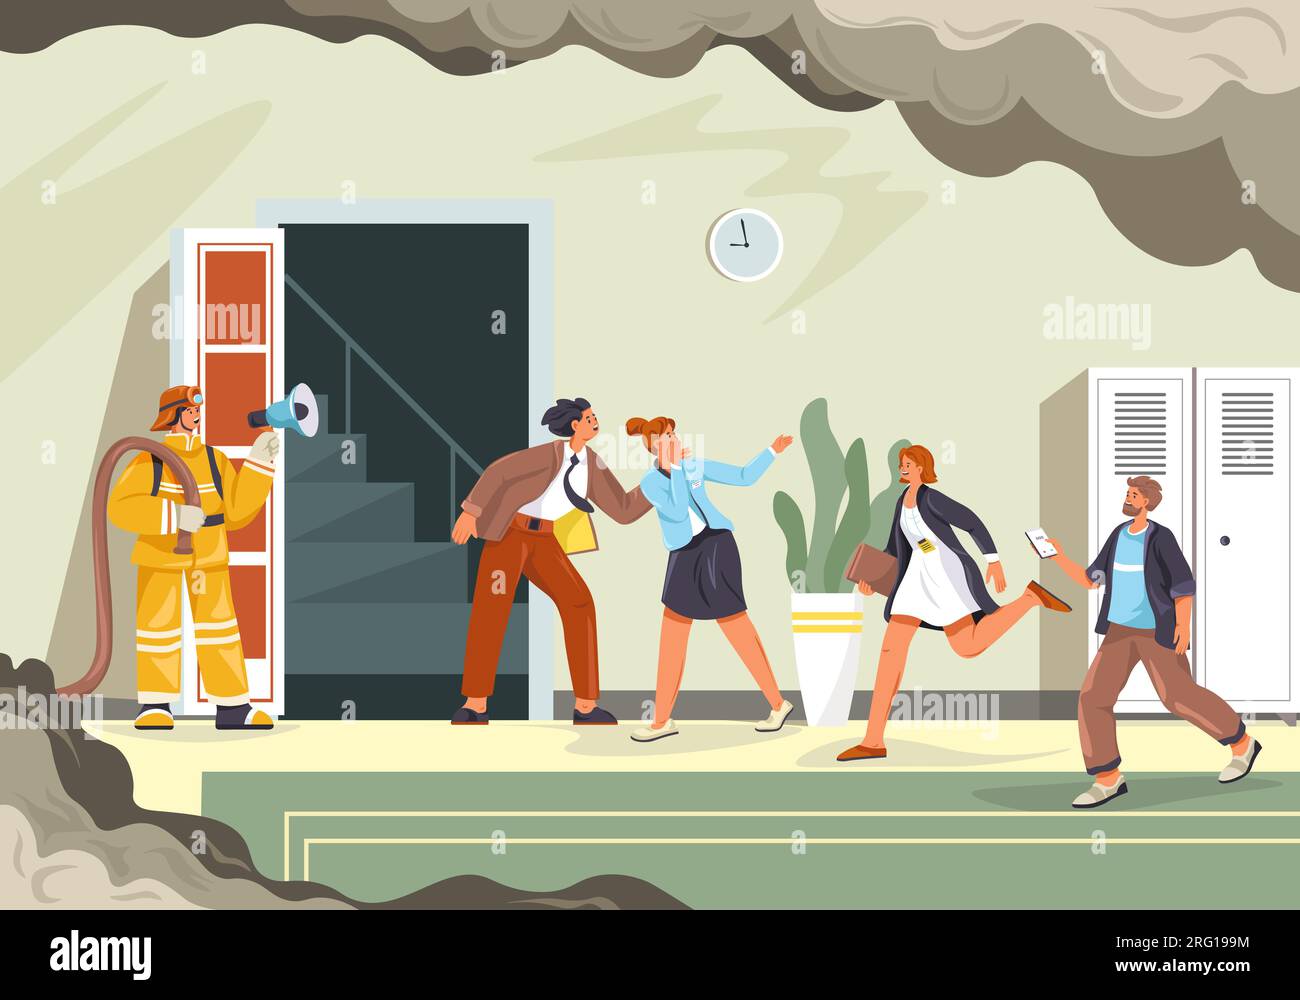 People evacuation. Fire evacuating employees to safety emergency escape, evacuate instruction plan employee leaving office building run in doorway exit, recent vector illustration of safety emergency Stock Vector